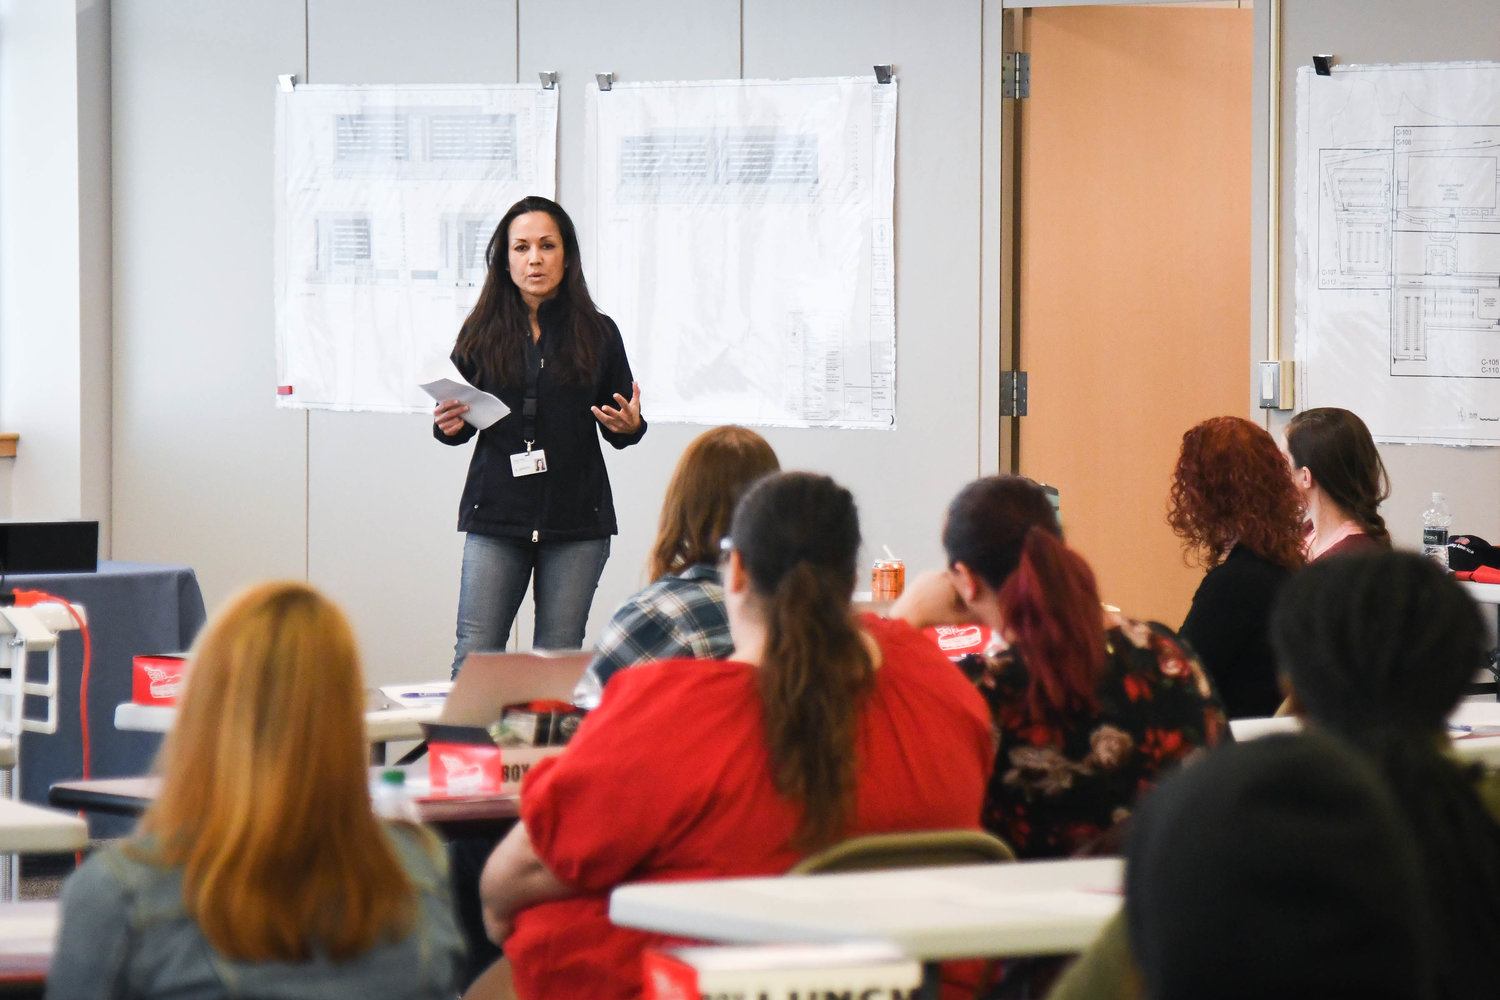 CONSTRUCTION — Hisa Zhu speaks during a free program about opportunities for women in construction at the Wynn Hospital Construction Offices in Utica. Participants learned about field and professional opportunities, advantages for women in the industry, pay and benefits.